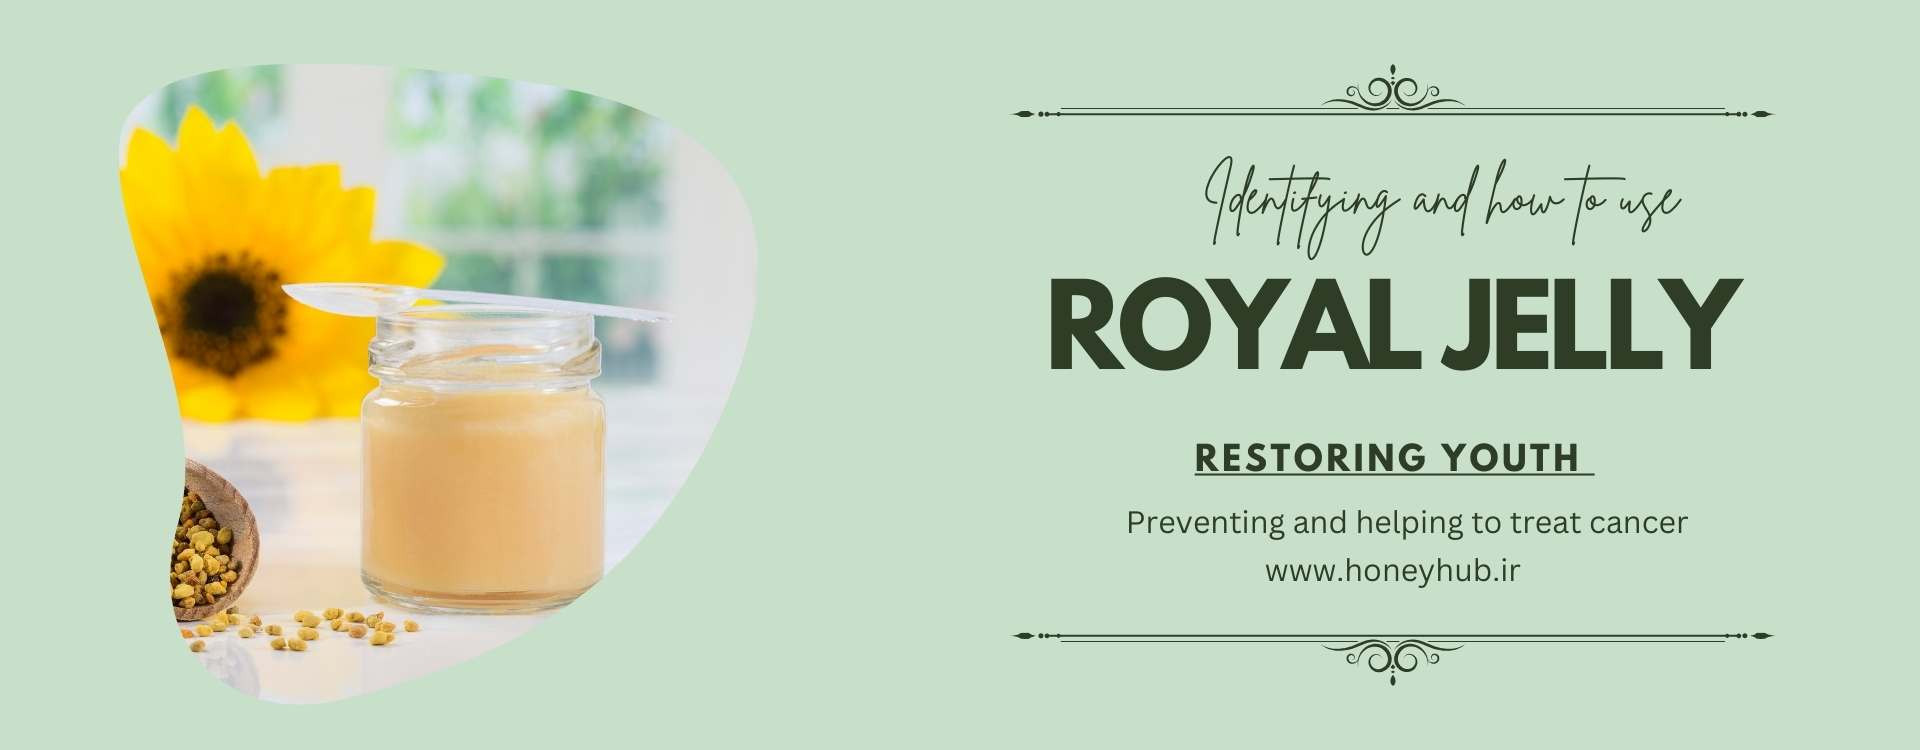 Benefits of Royal Jelly for Health and How to Consume It